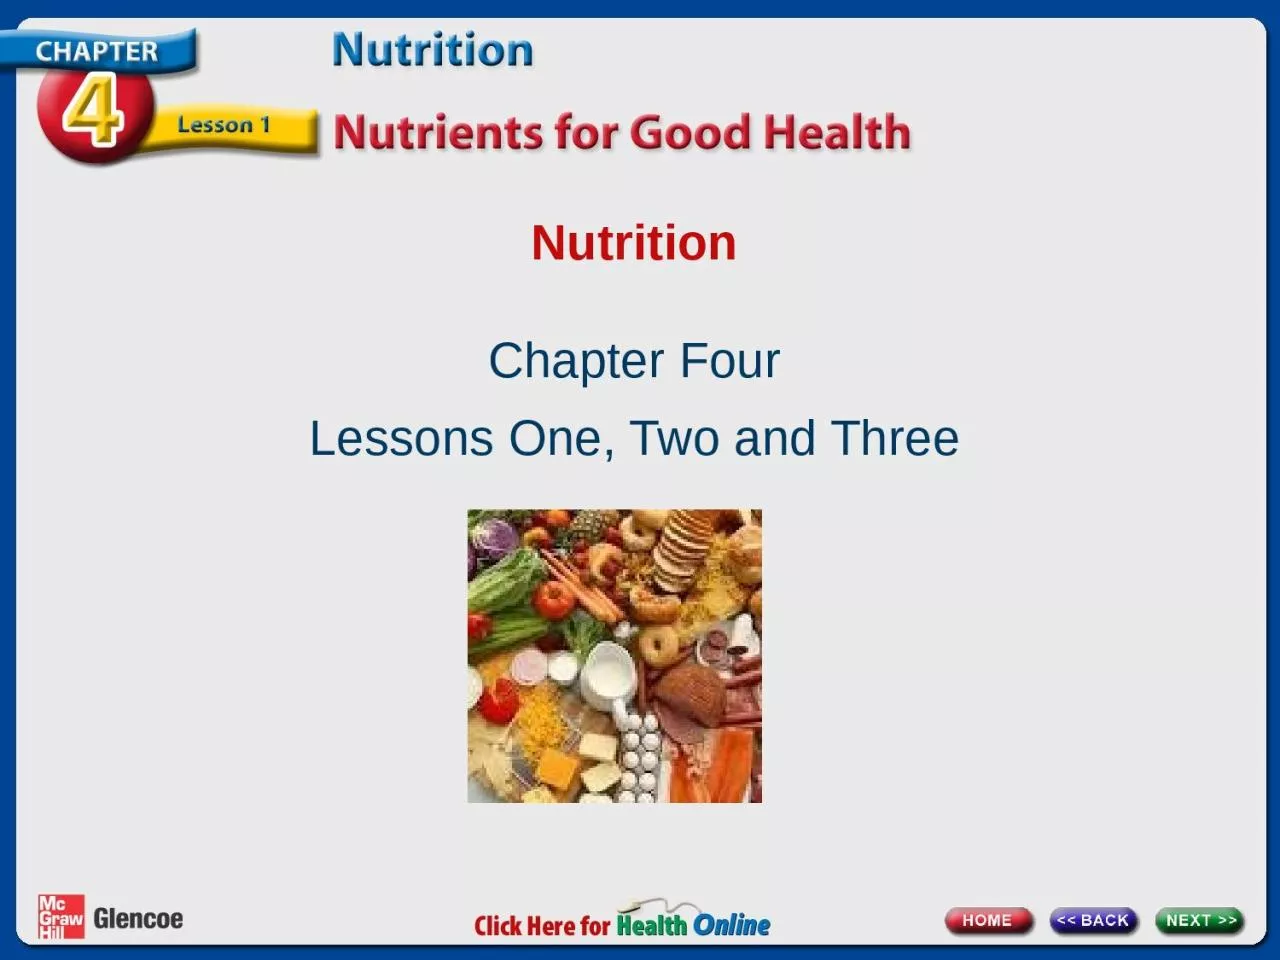 Nutrition Chapter Four Lessons One, Two and Three